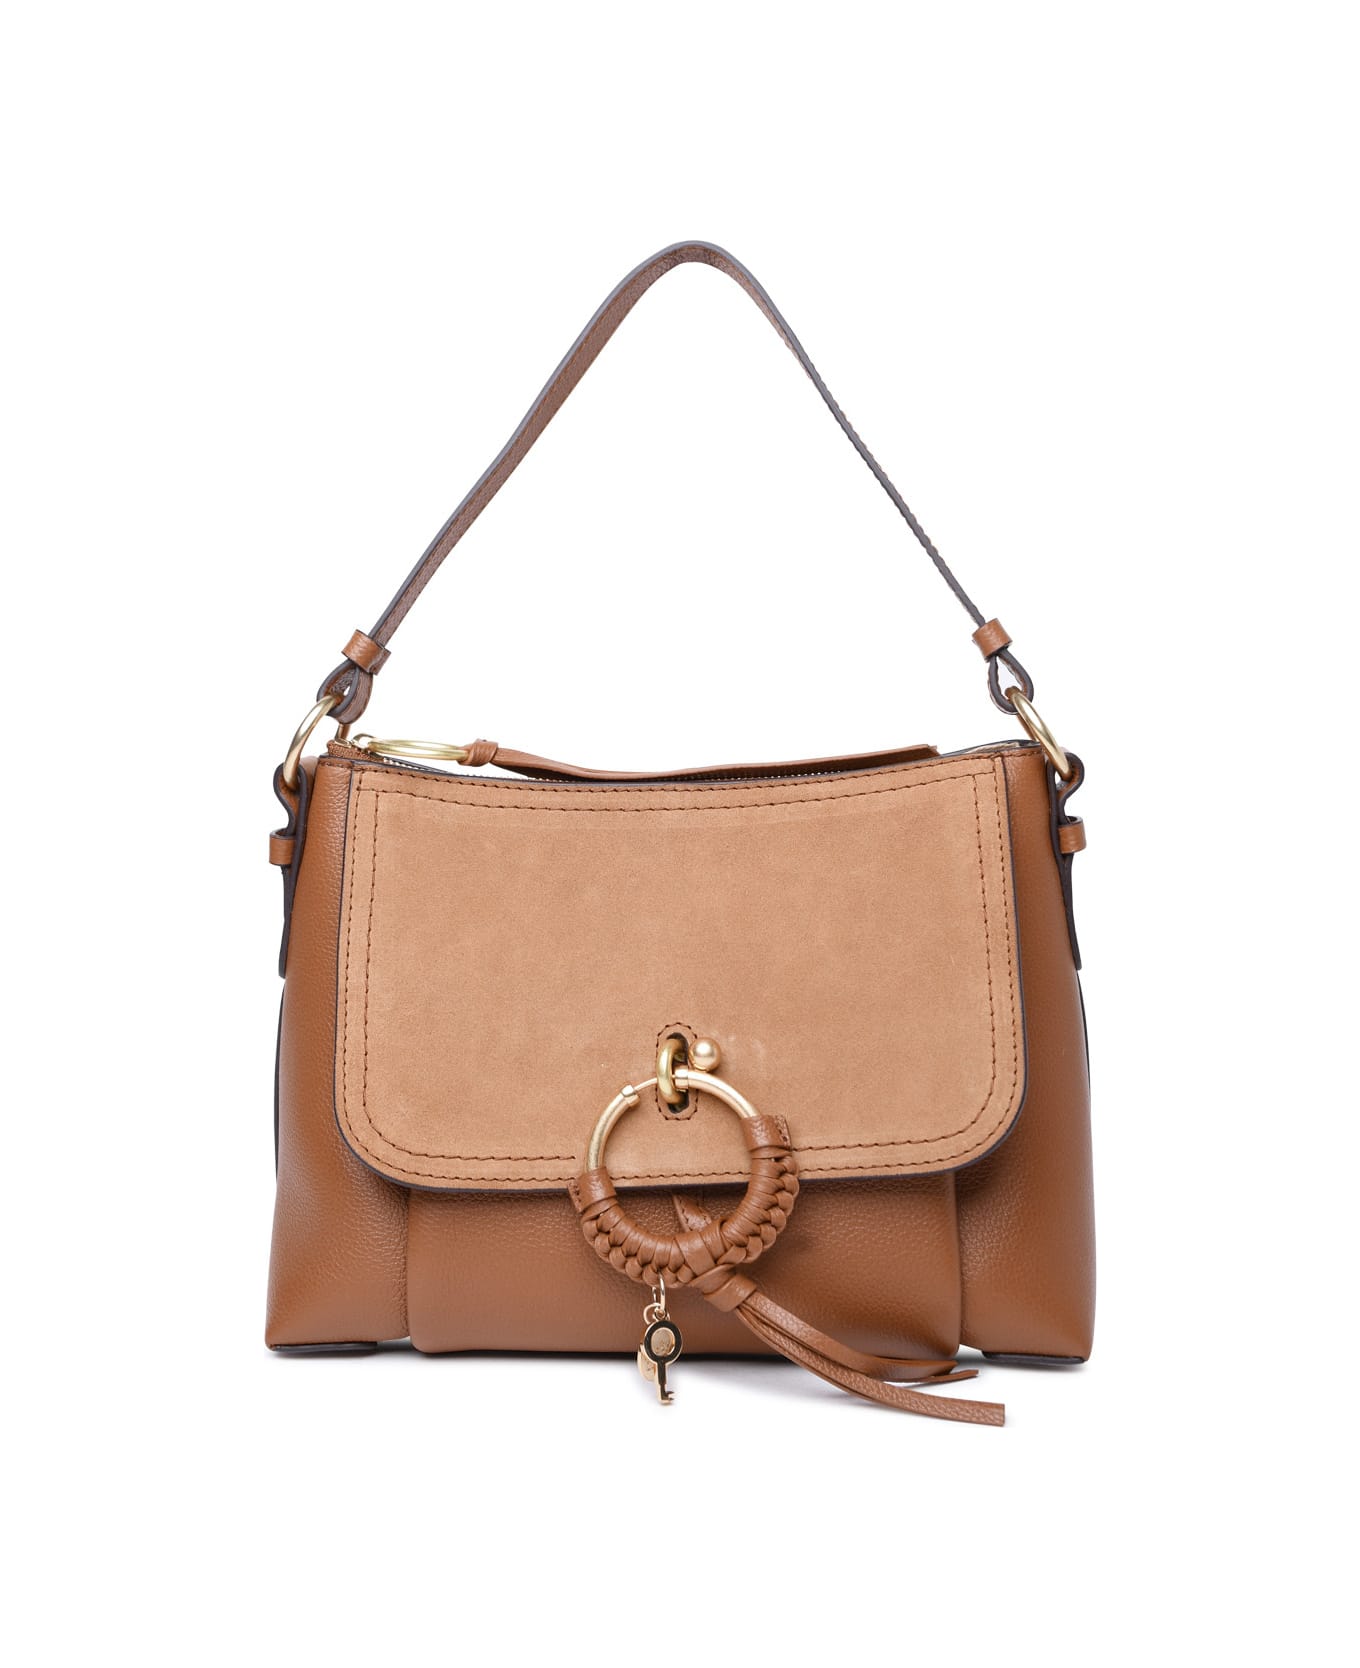 See by Chloé Small 'joan' Caramel Leather Bag - Brown